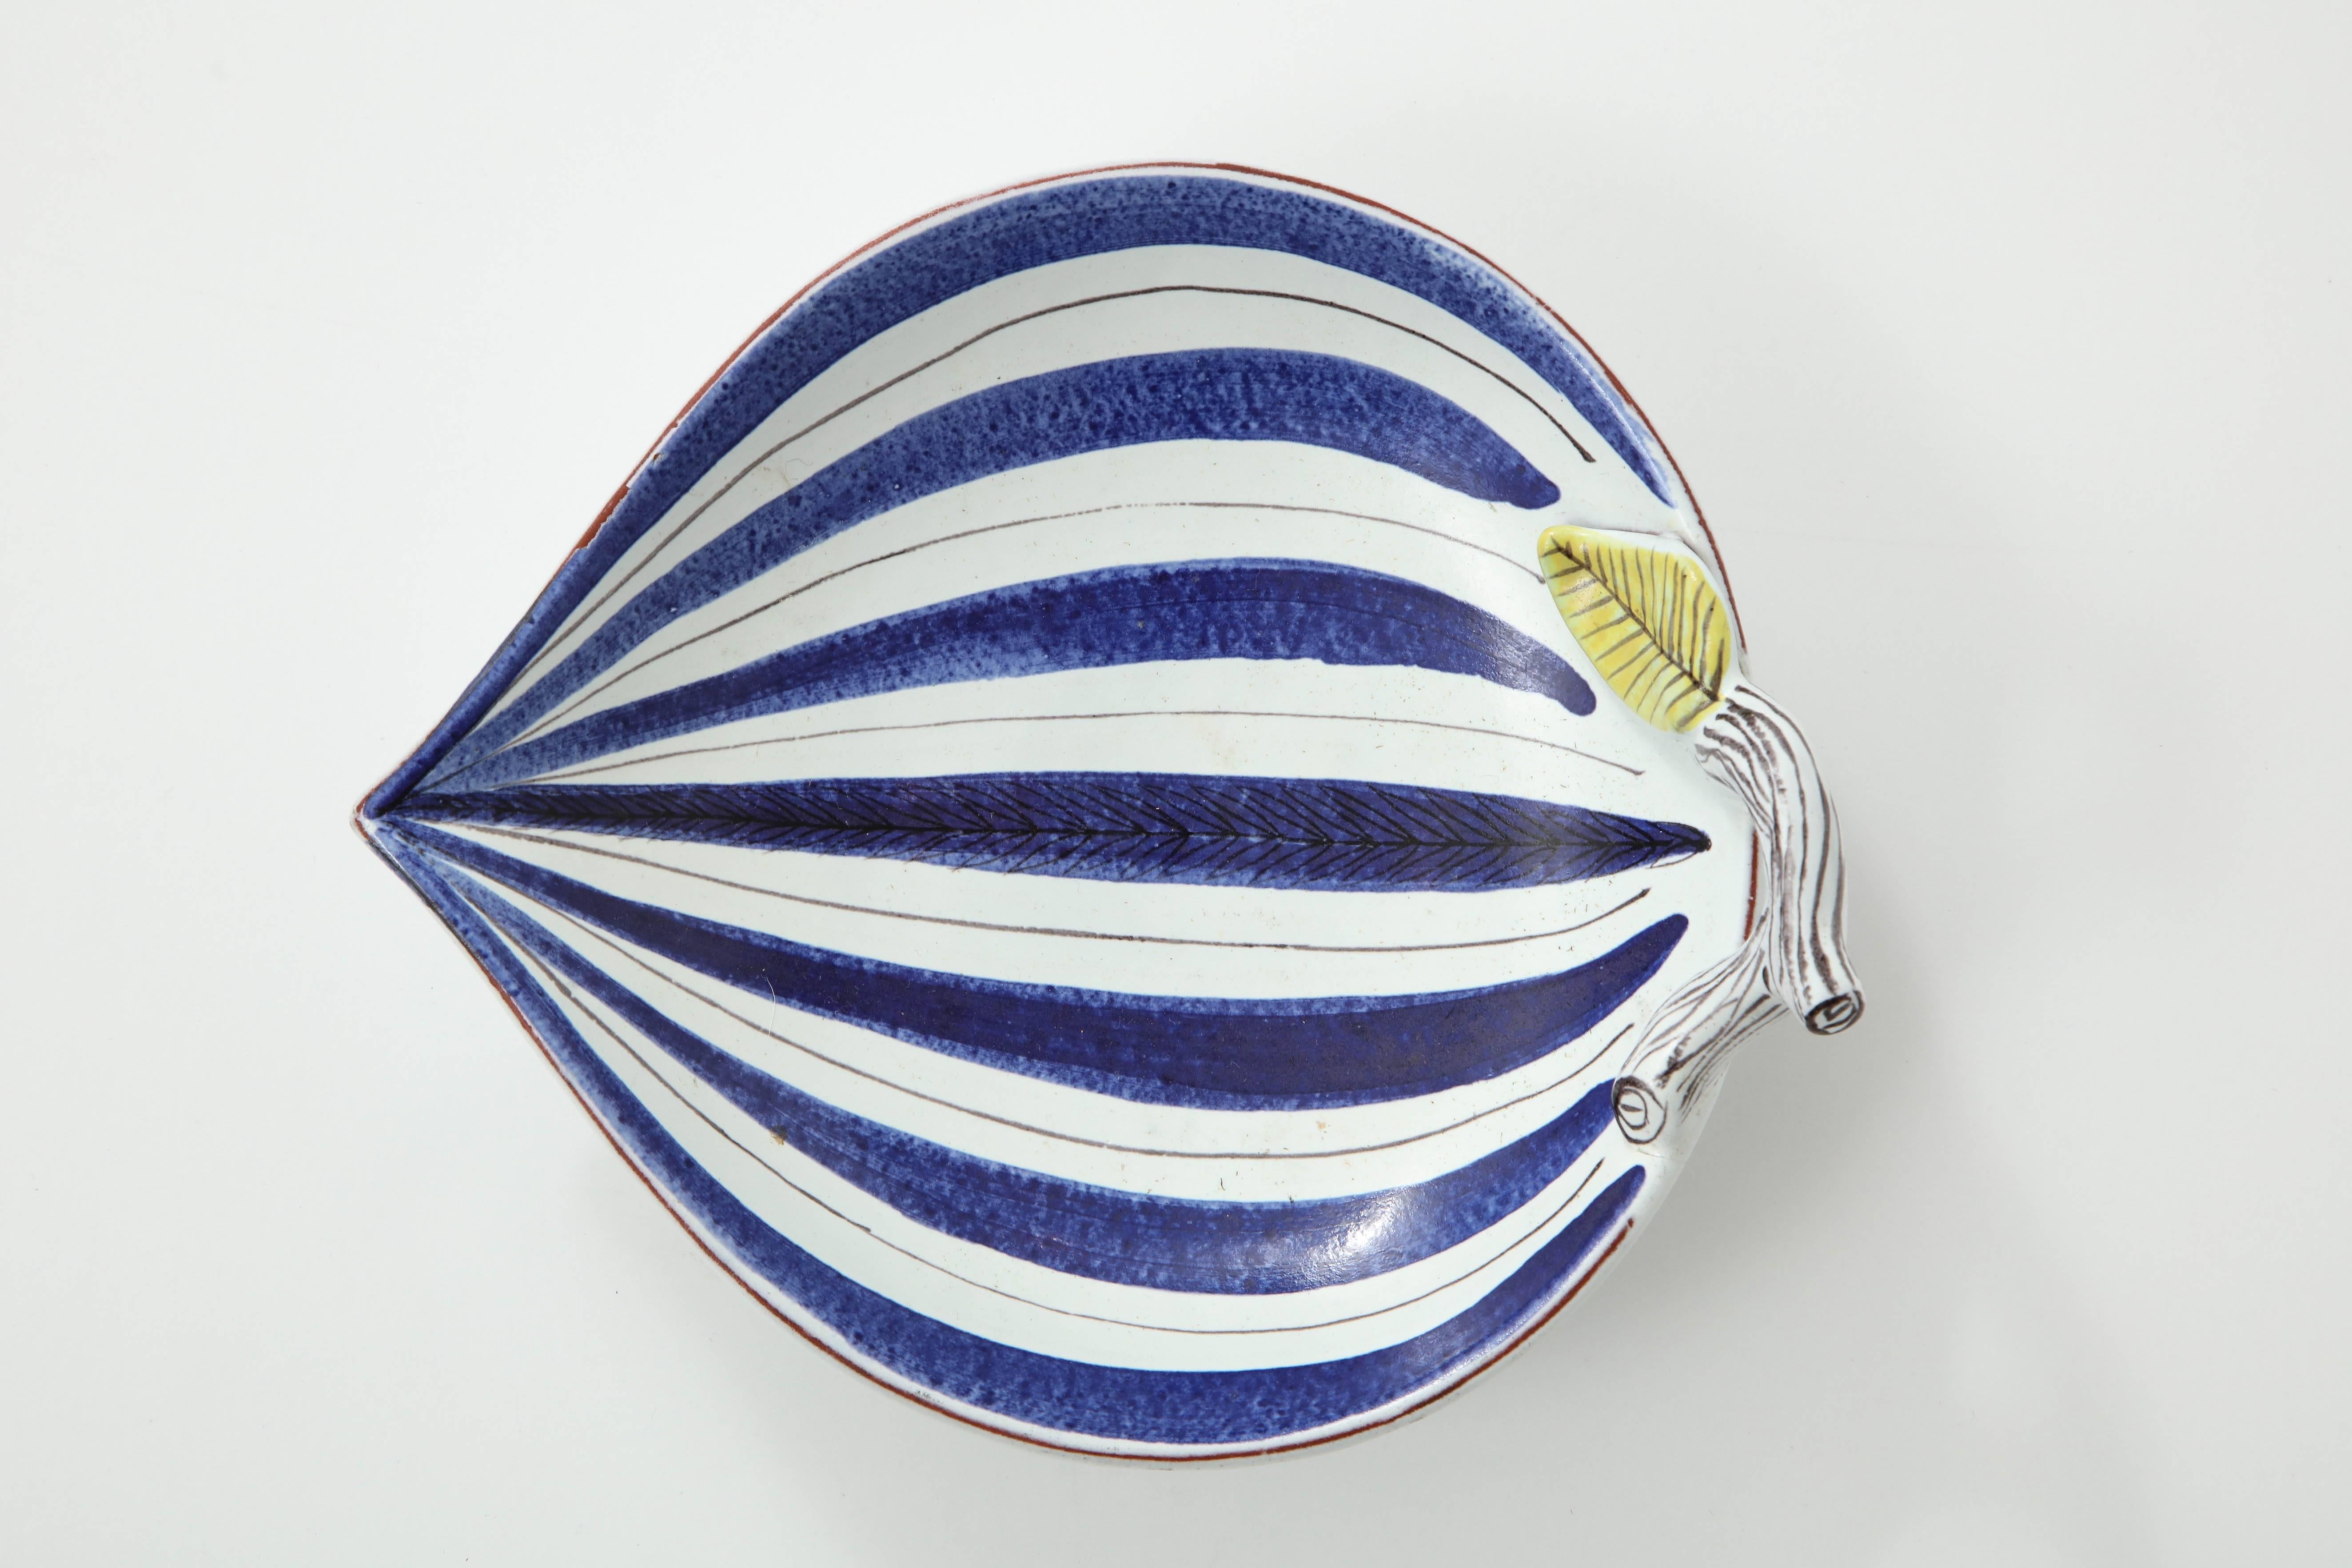 Decorative leaf shaped bowl by Stig Lindberg, Sweden, circa 1950. Faience.
Very good condition.
An artistic jack-of-all-trades, Stig Lindberg was accomplished in Industrial Design, textile design, painting, illustration, glassblowing and ceramics.